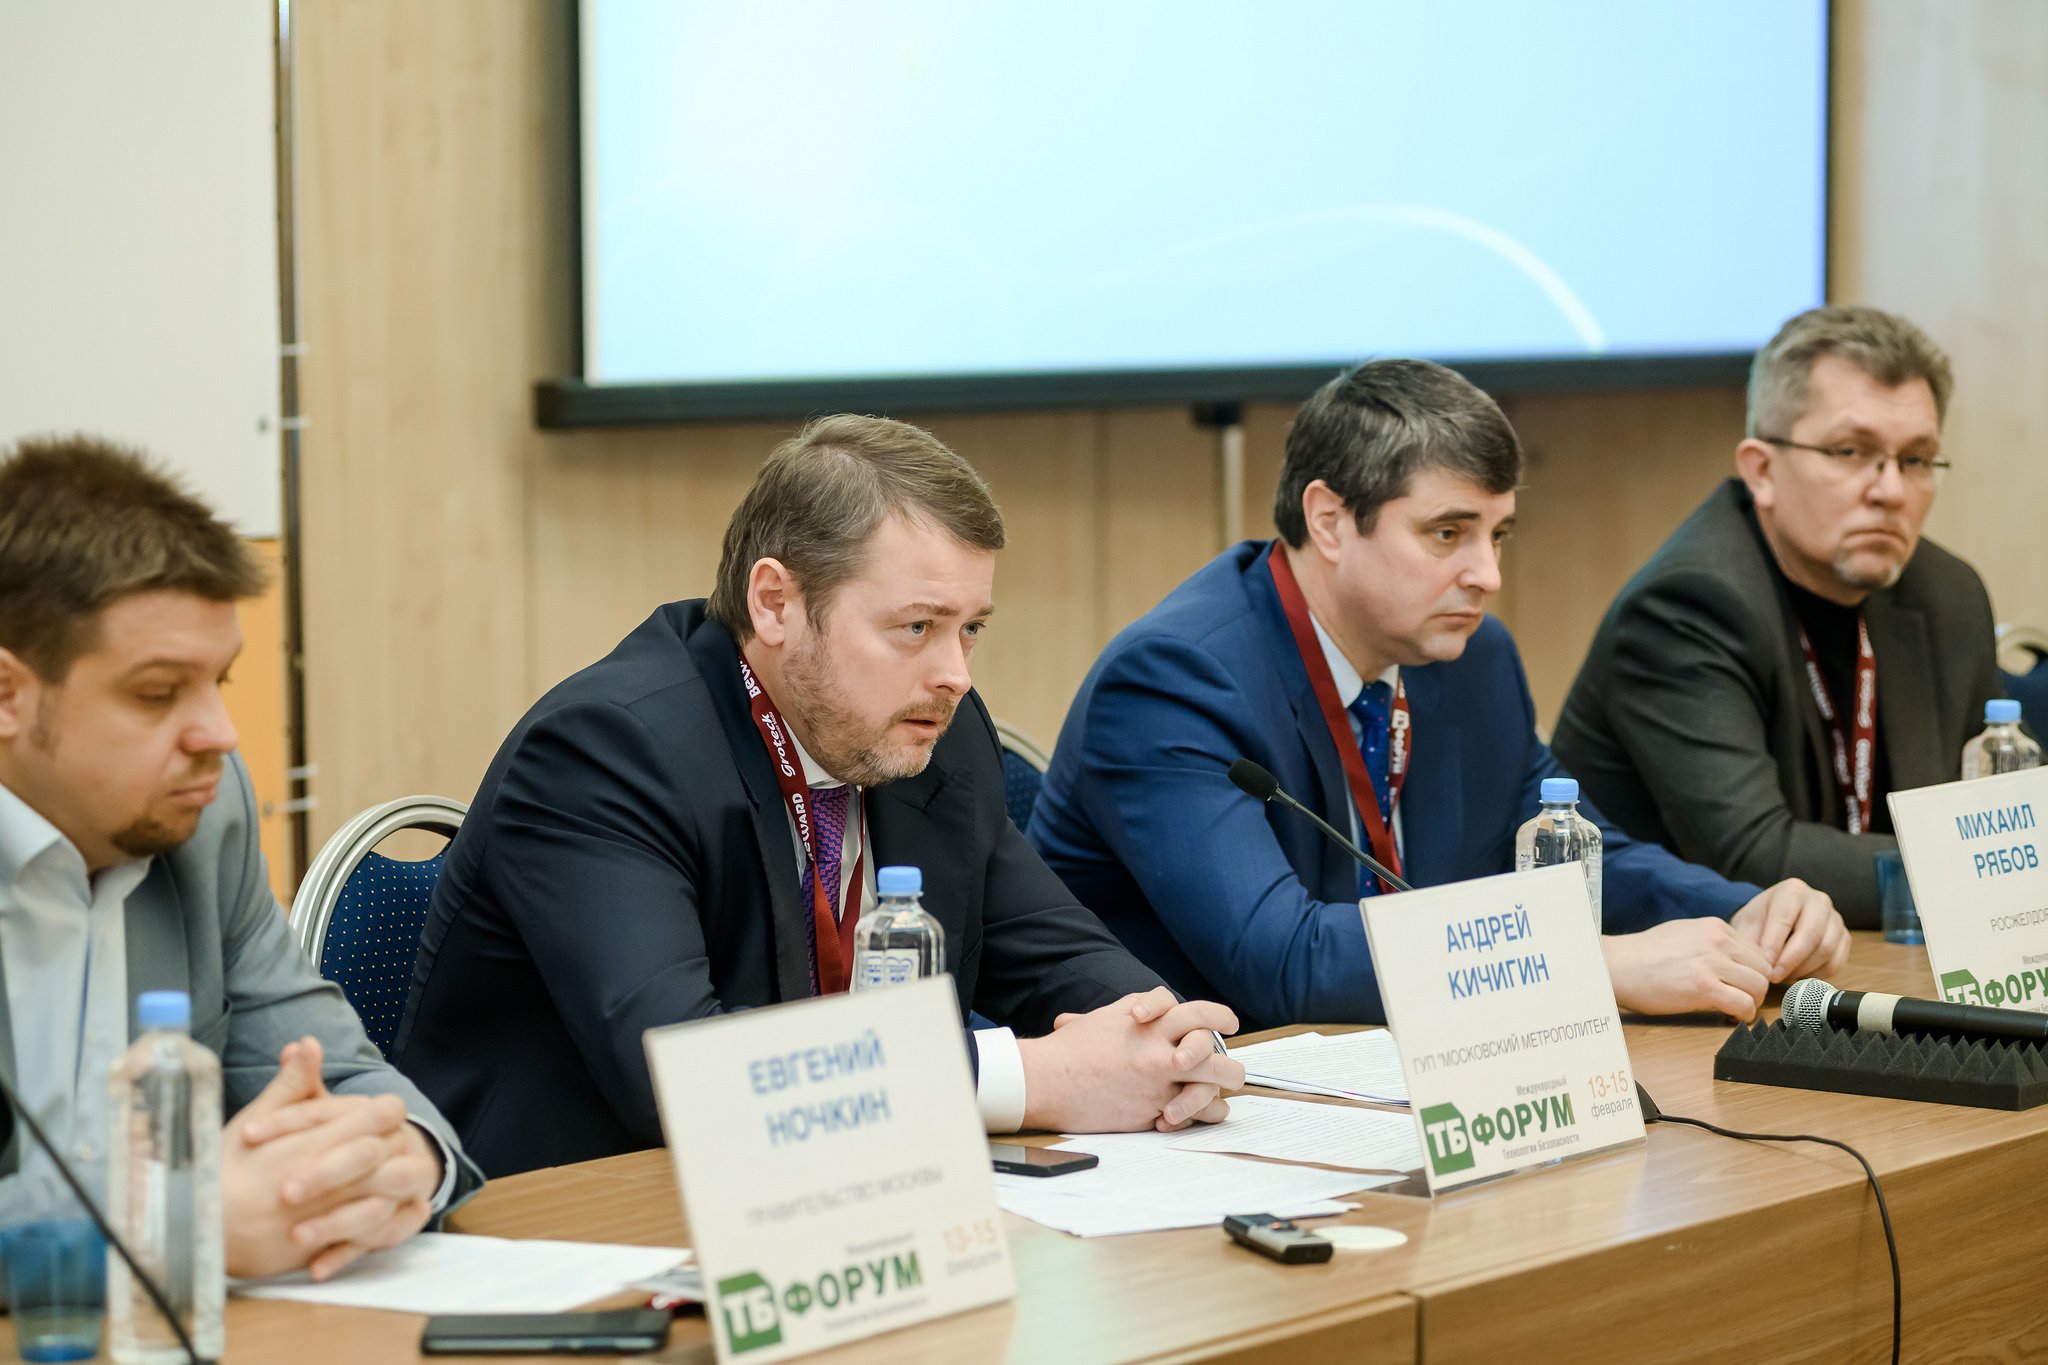 TB Forum participants will discuss actual tasks to ensure the safety and security of the Moscow metro